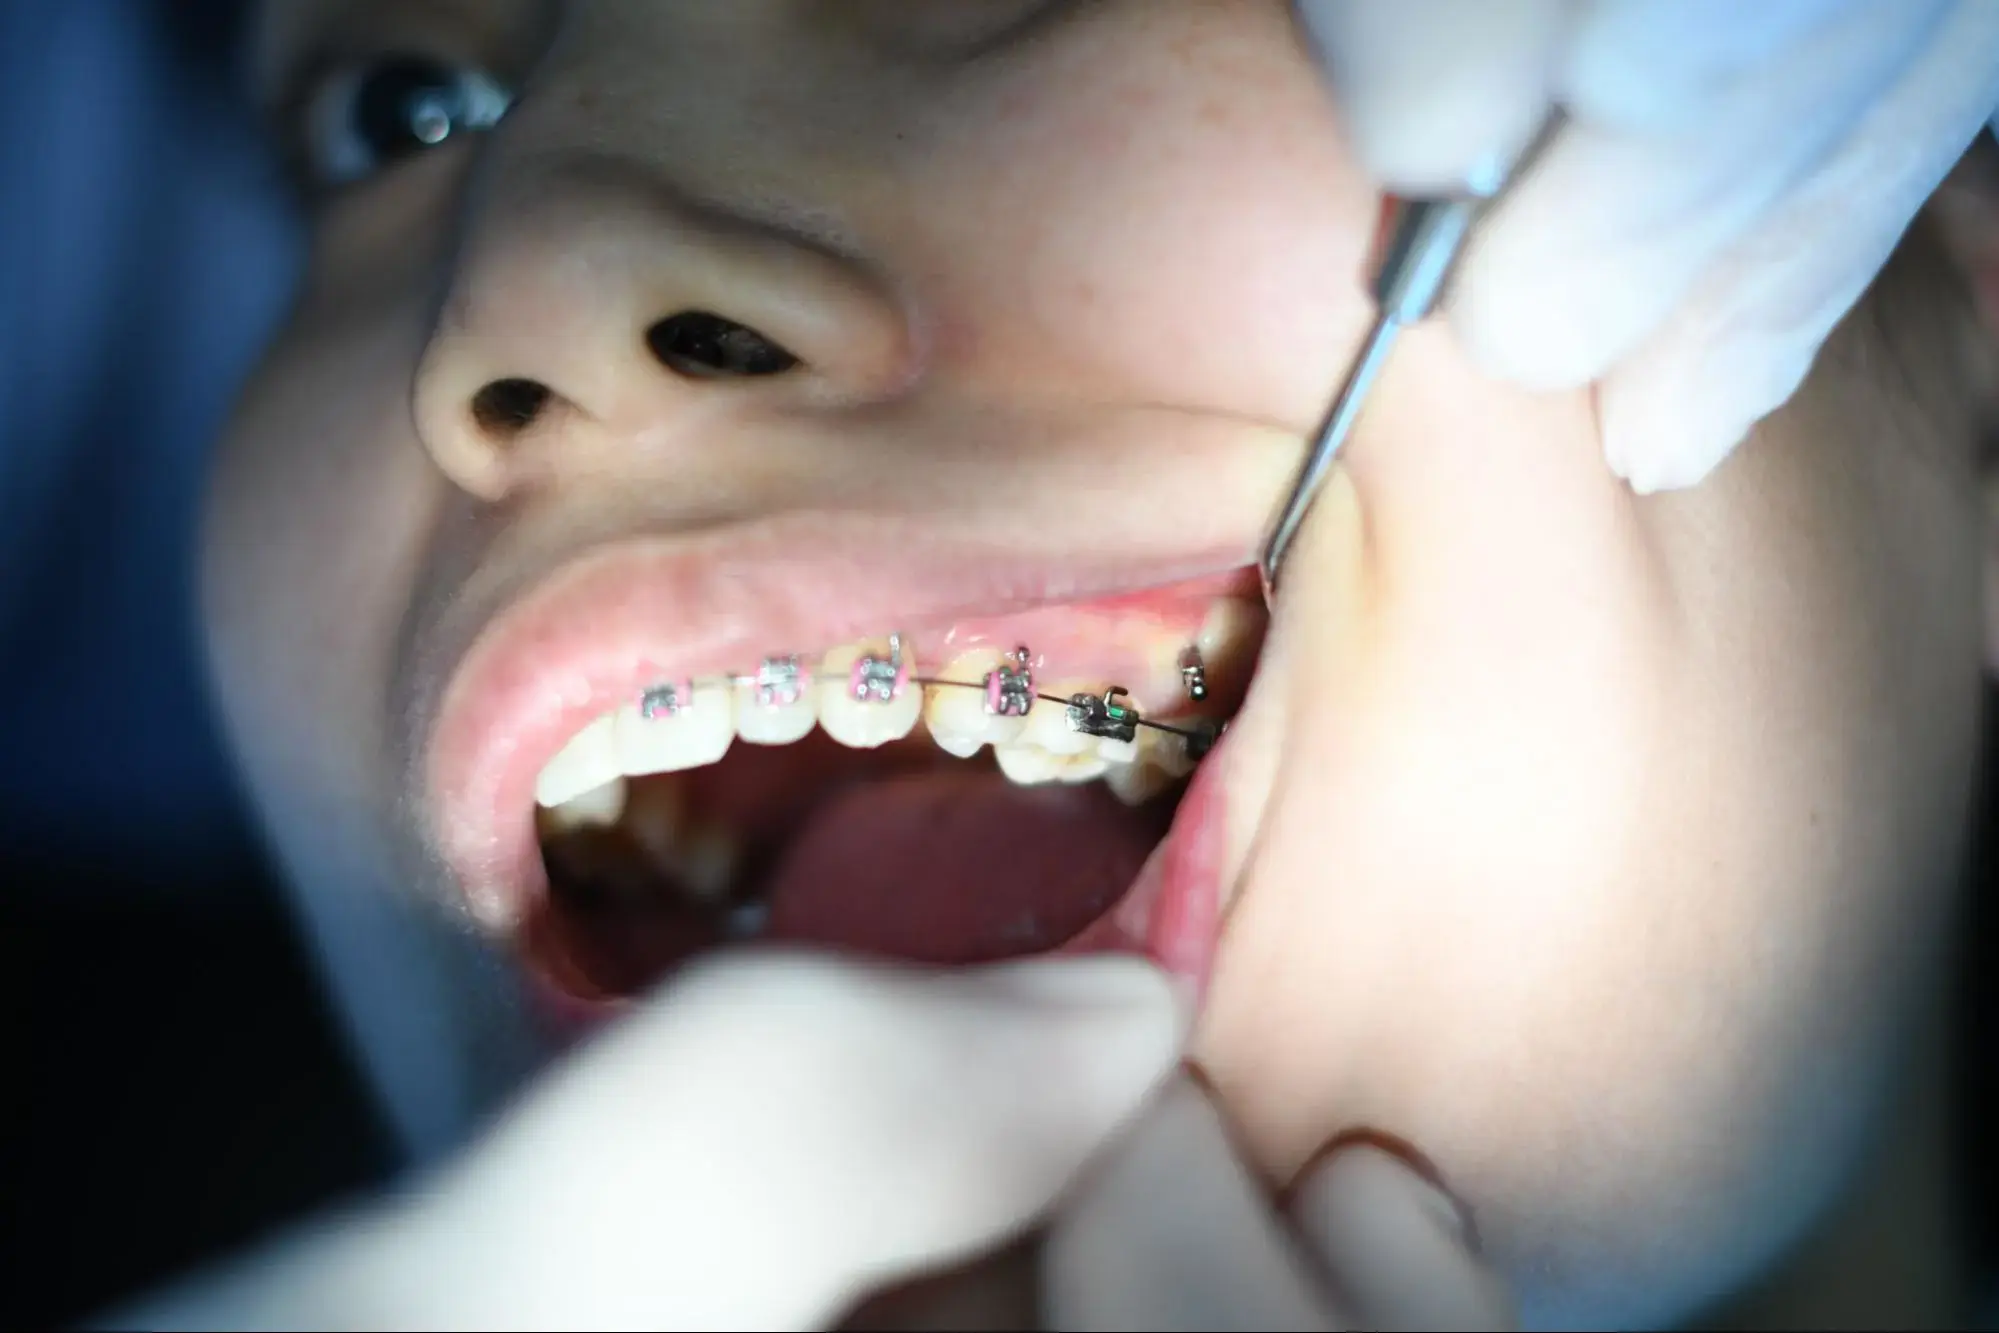 A person getting braces put in.